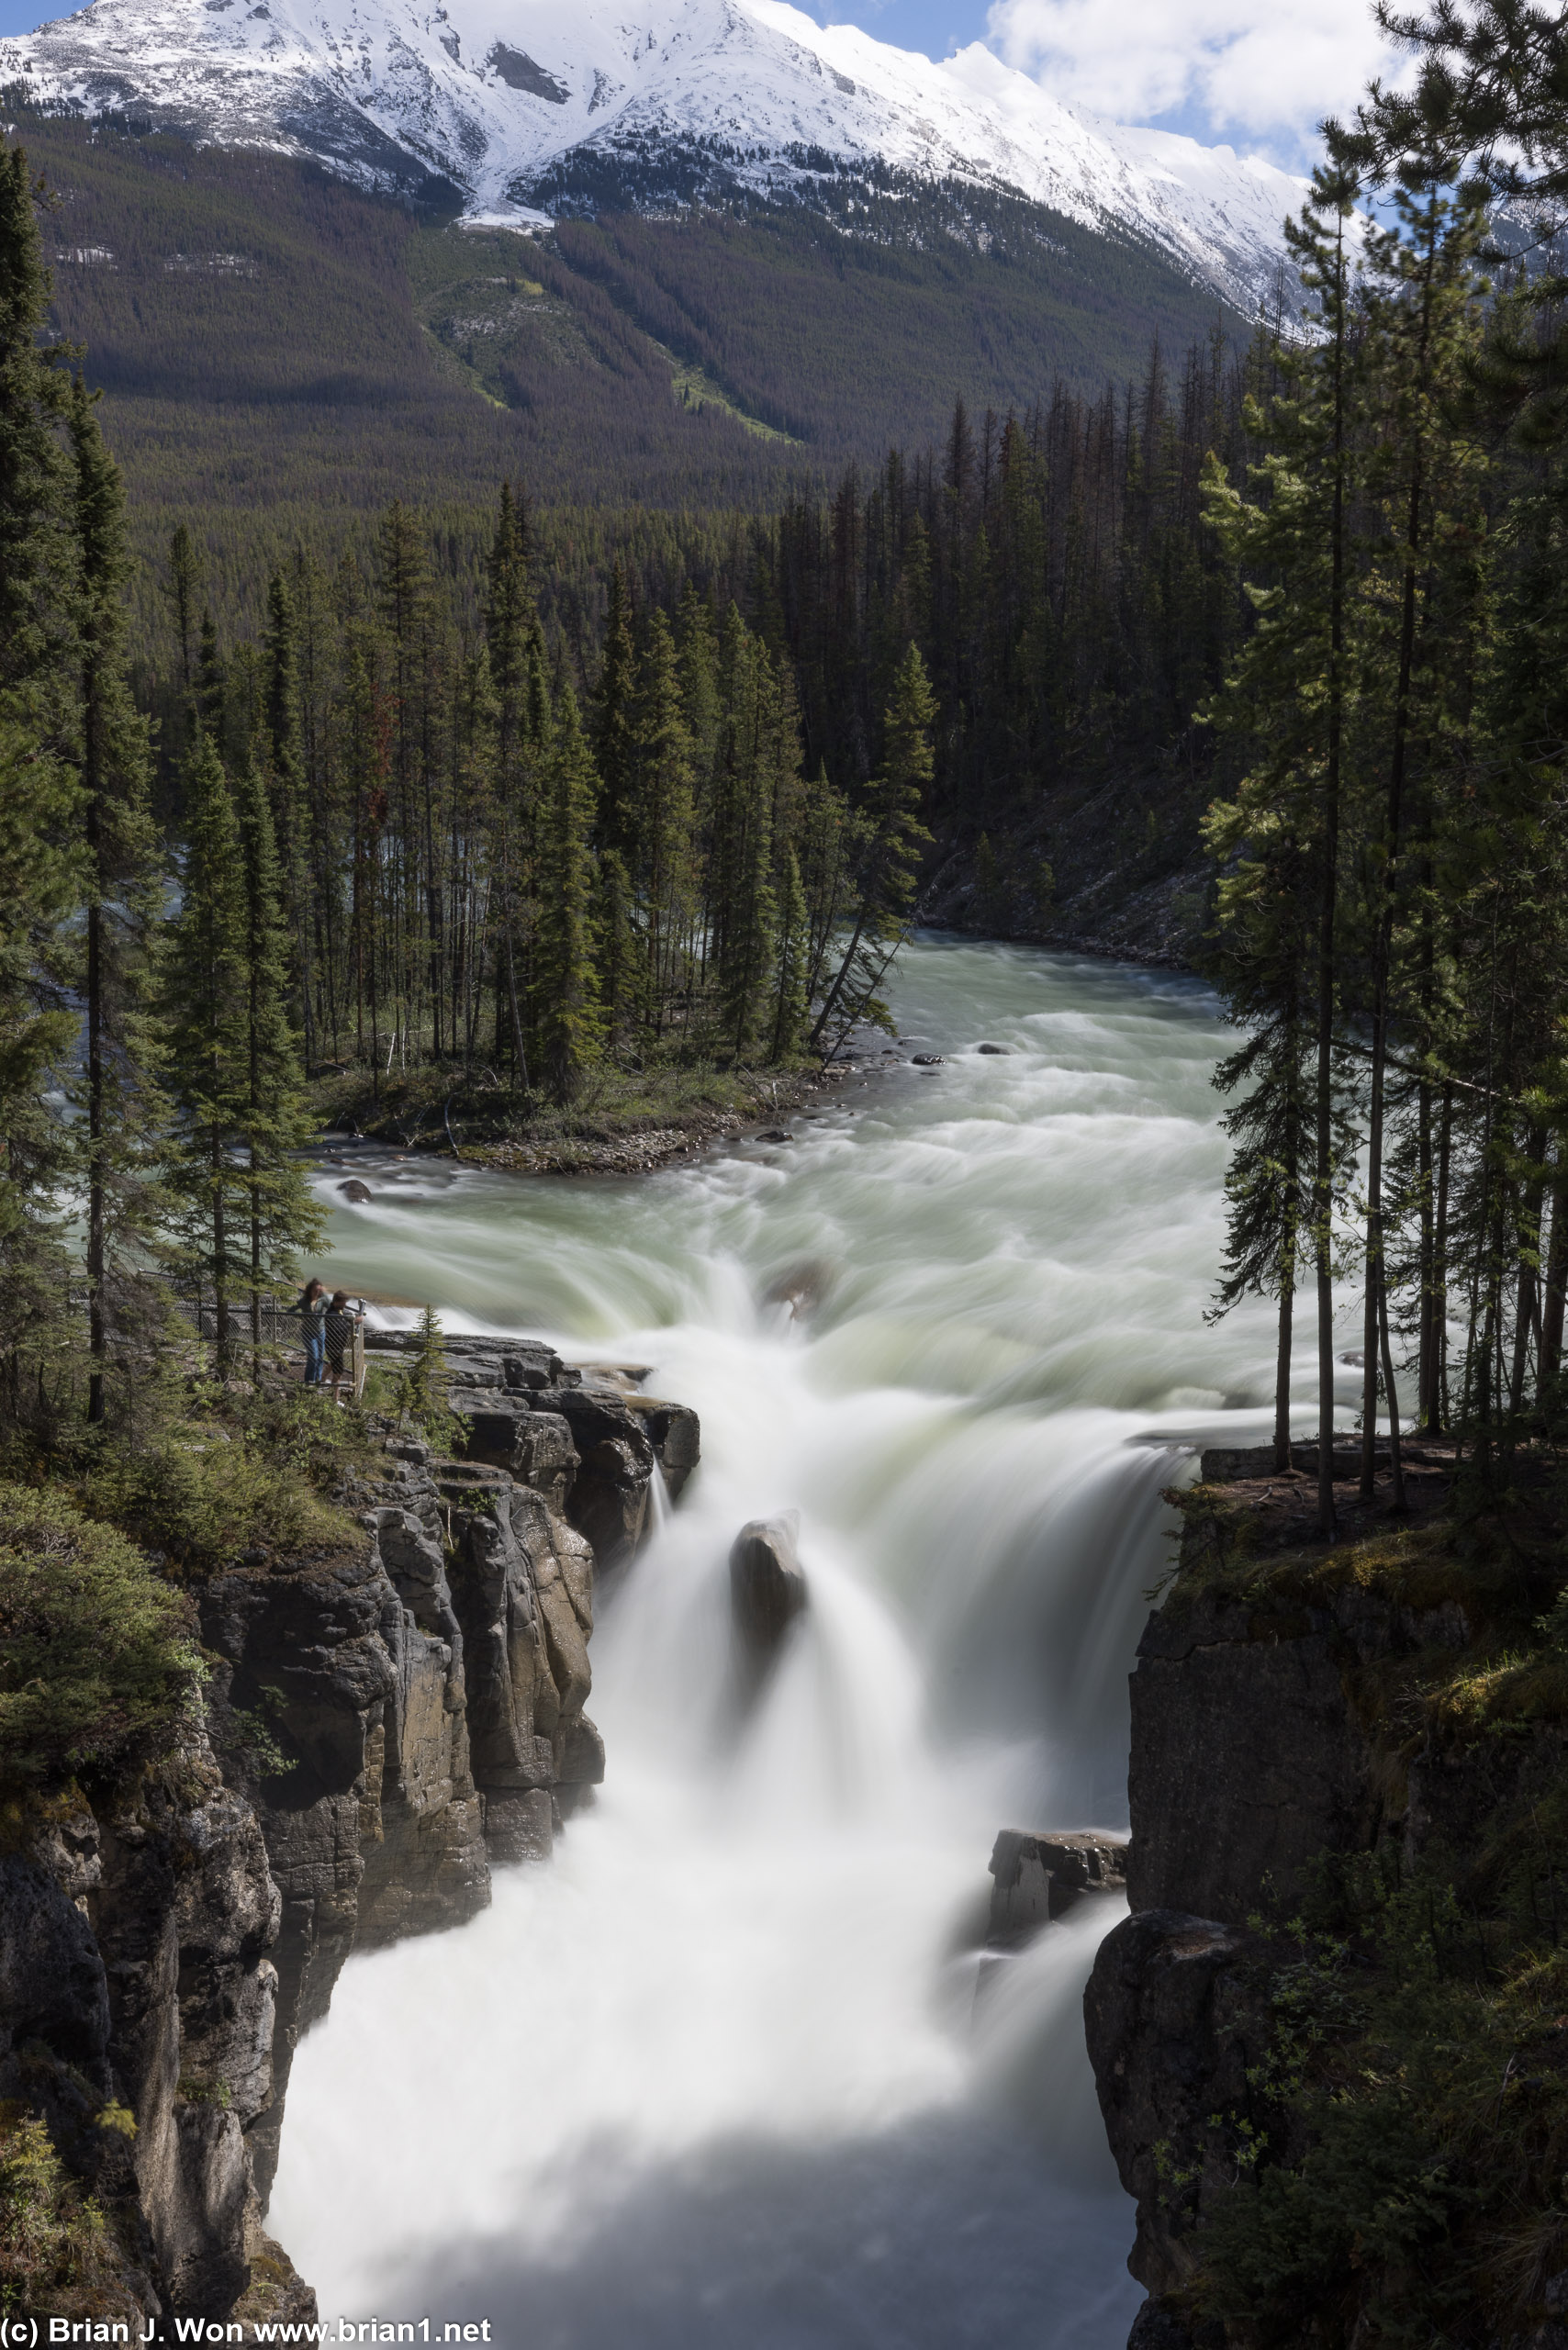 Still not able to figure out the classic angle of Sunwapta Falls.